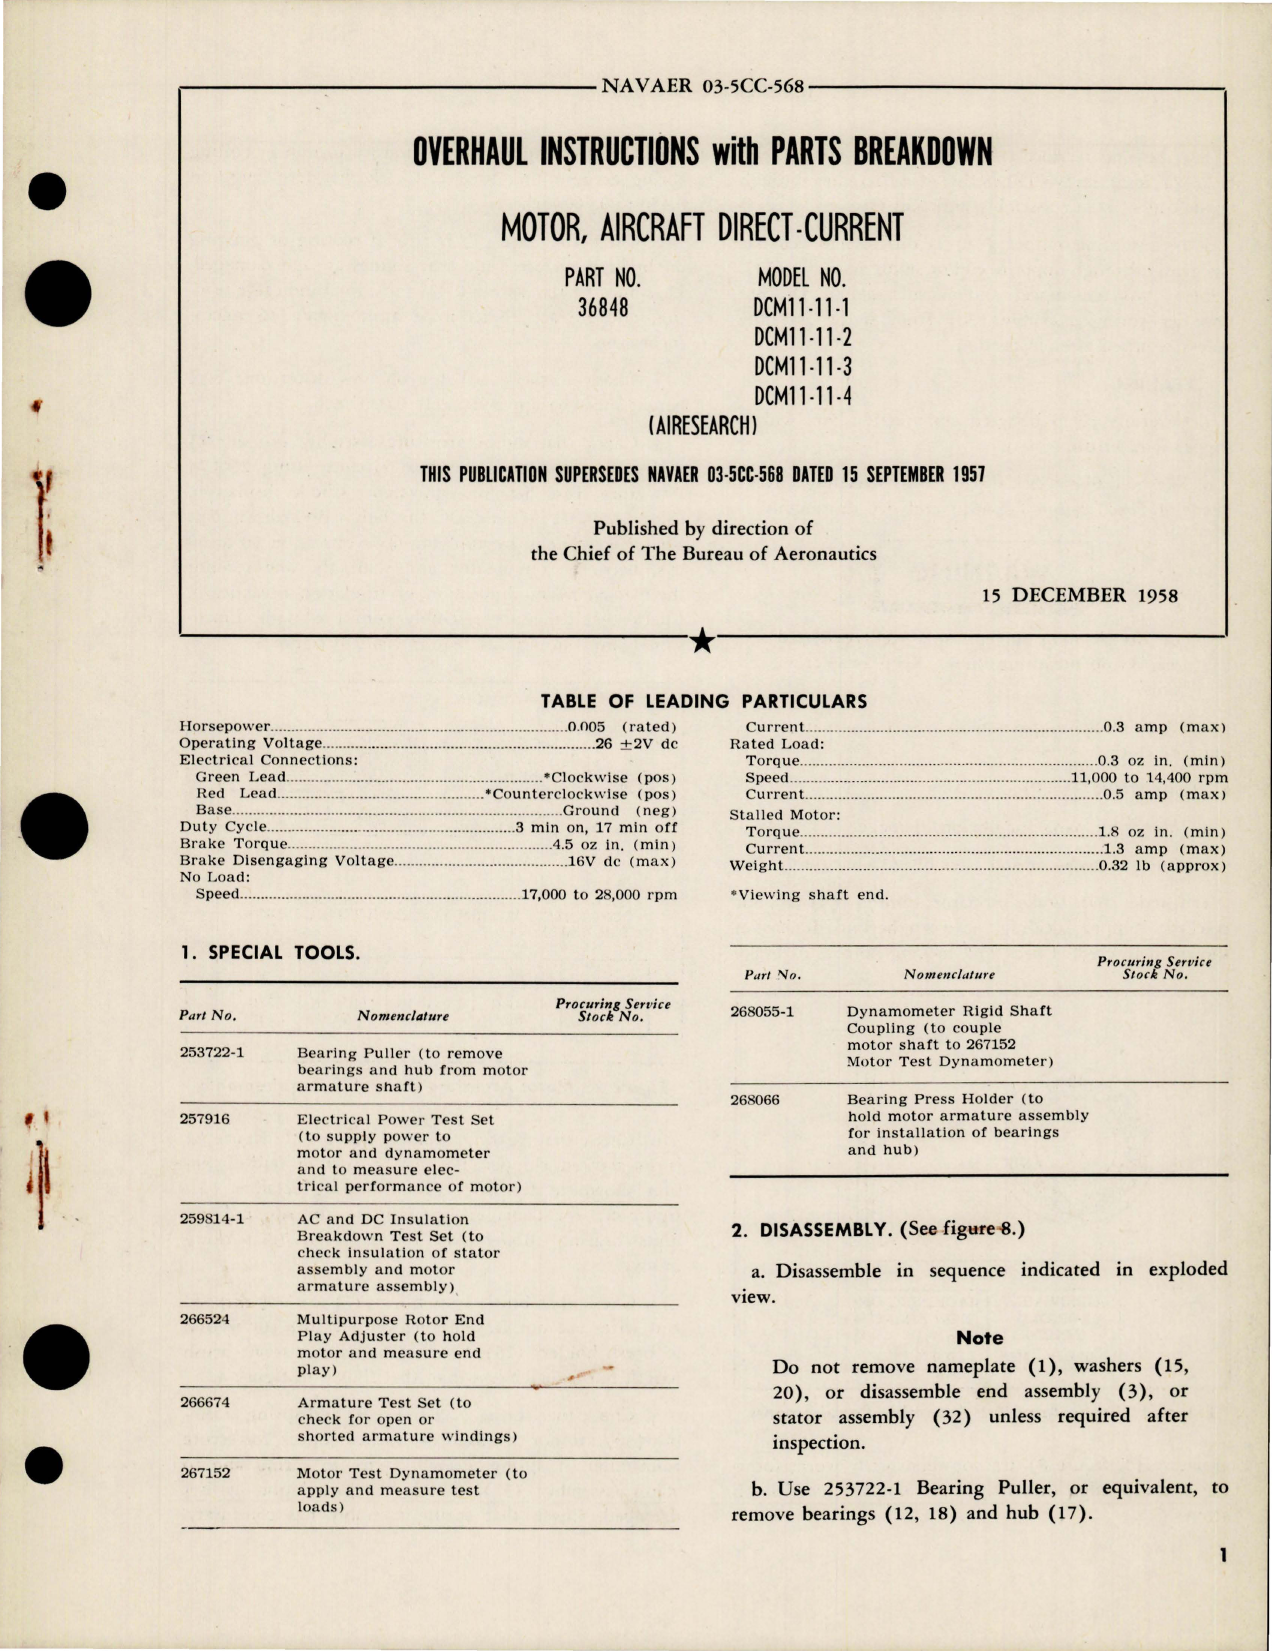 Sample page 1 from AirCorps Library document: Overhaul Instructions with Parts for Aircraft Direct Current Motor - Part 36848 